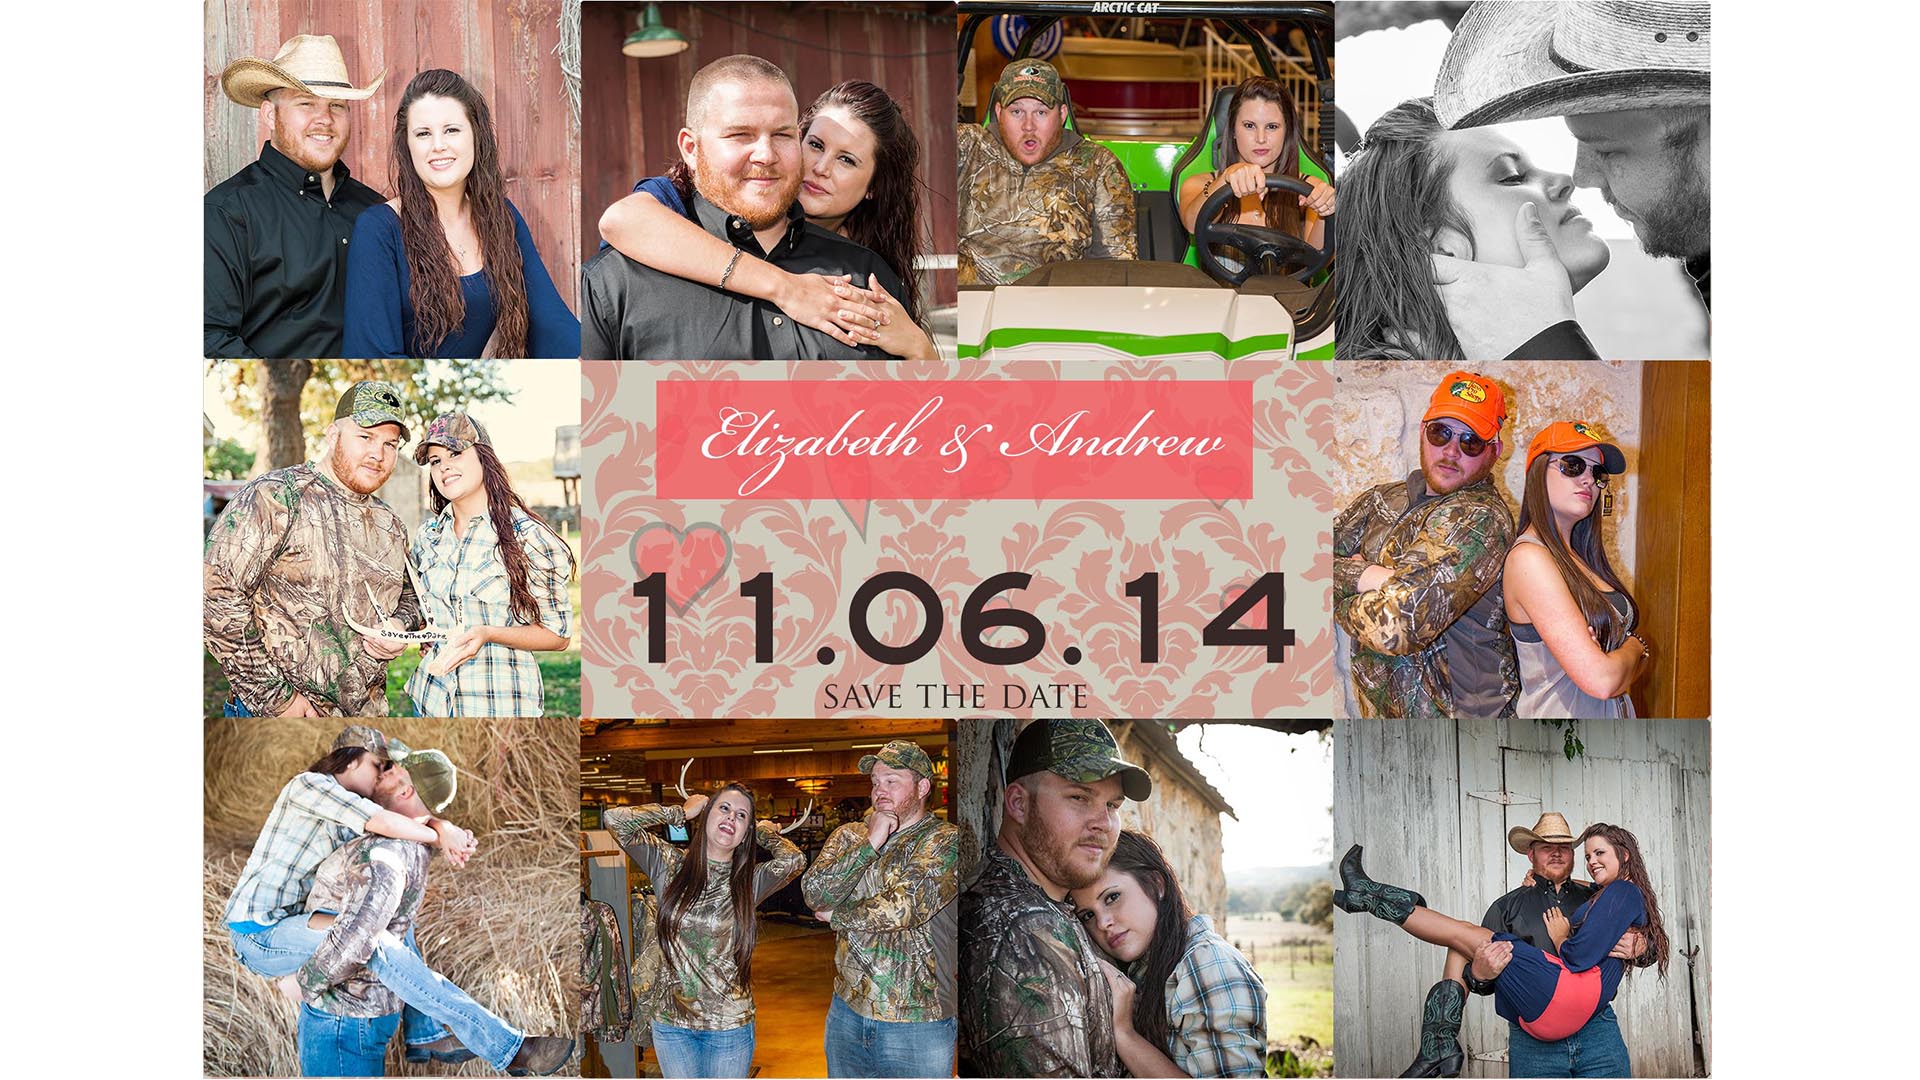 Save the Date Cards from R Spears Photography